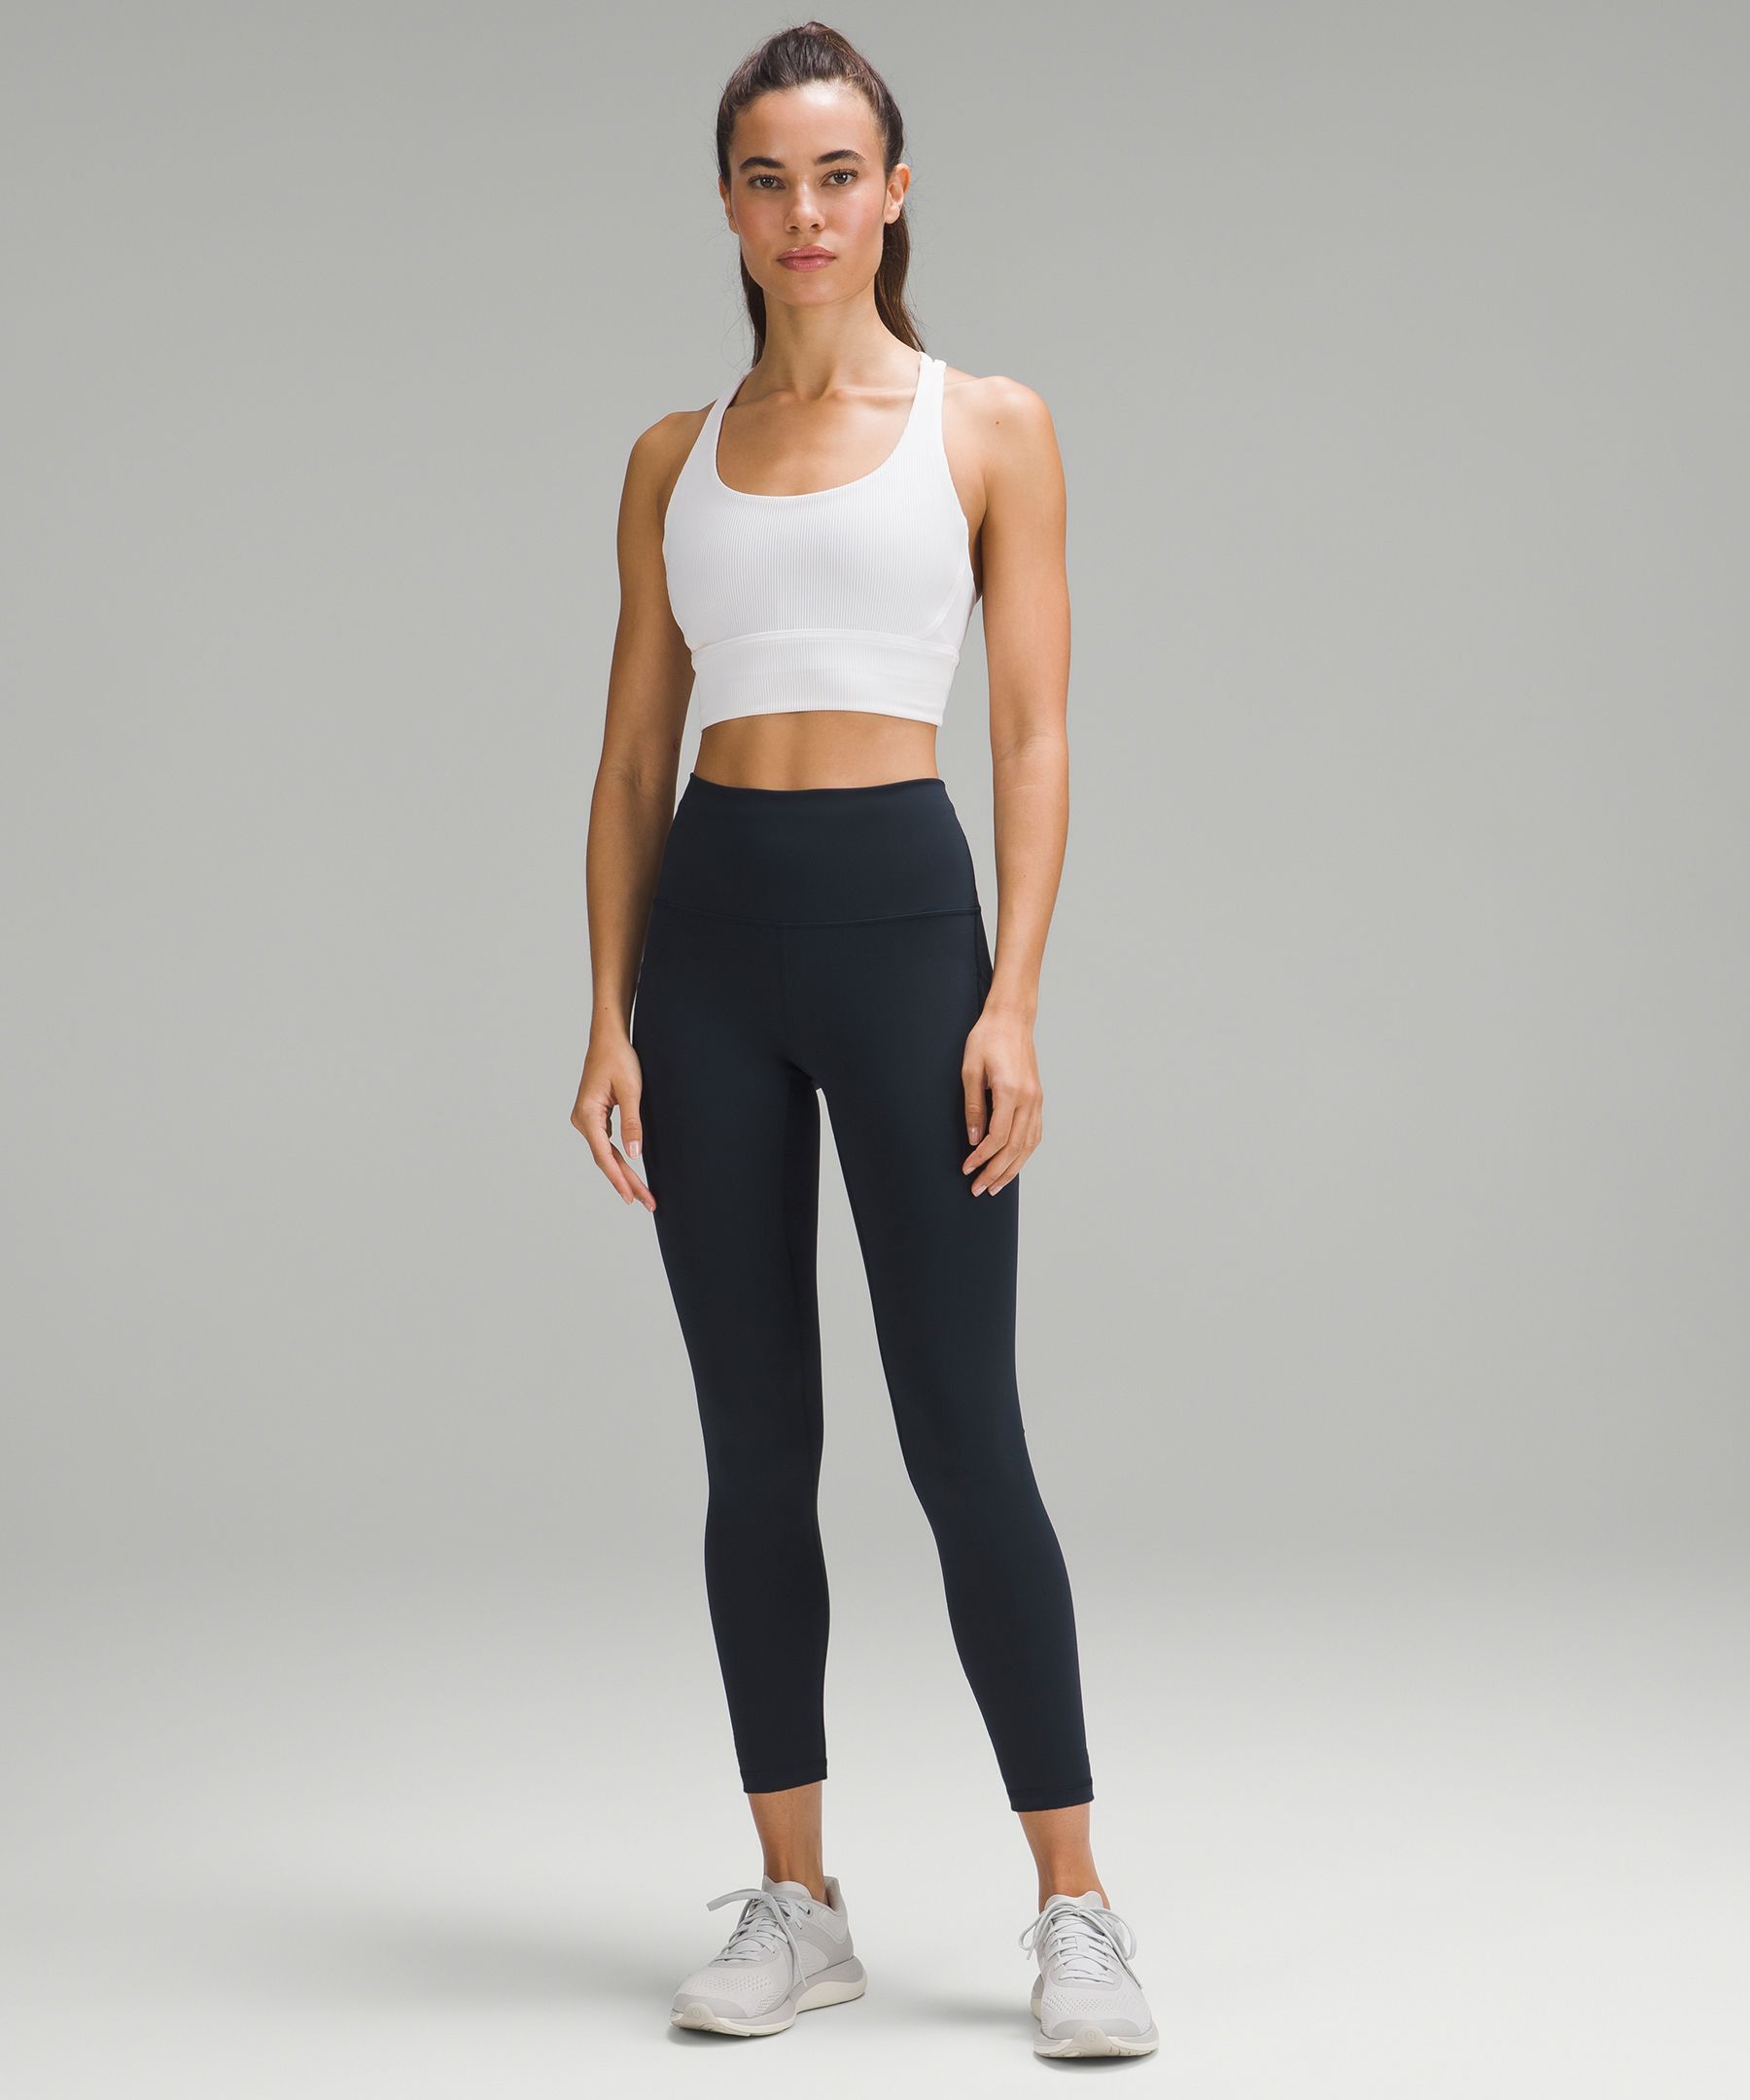 Wunder Train High-Rise Tight with Pockets 25